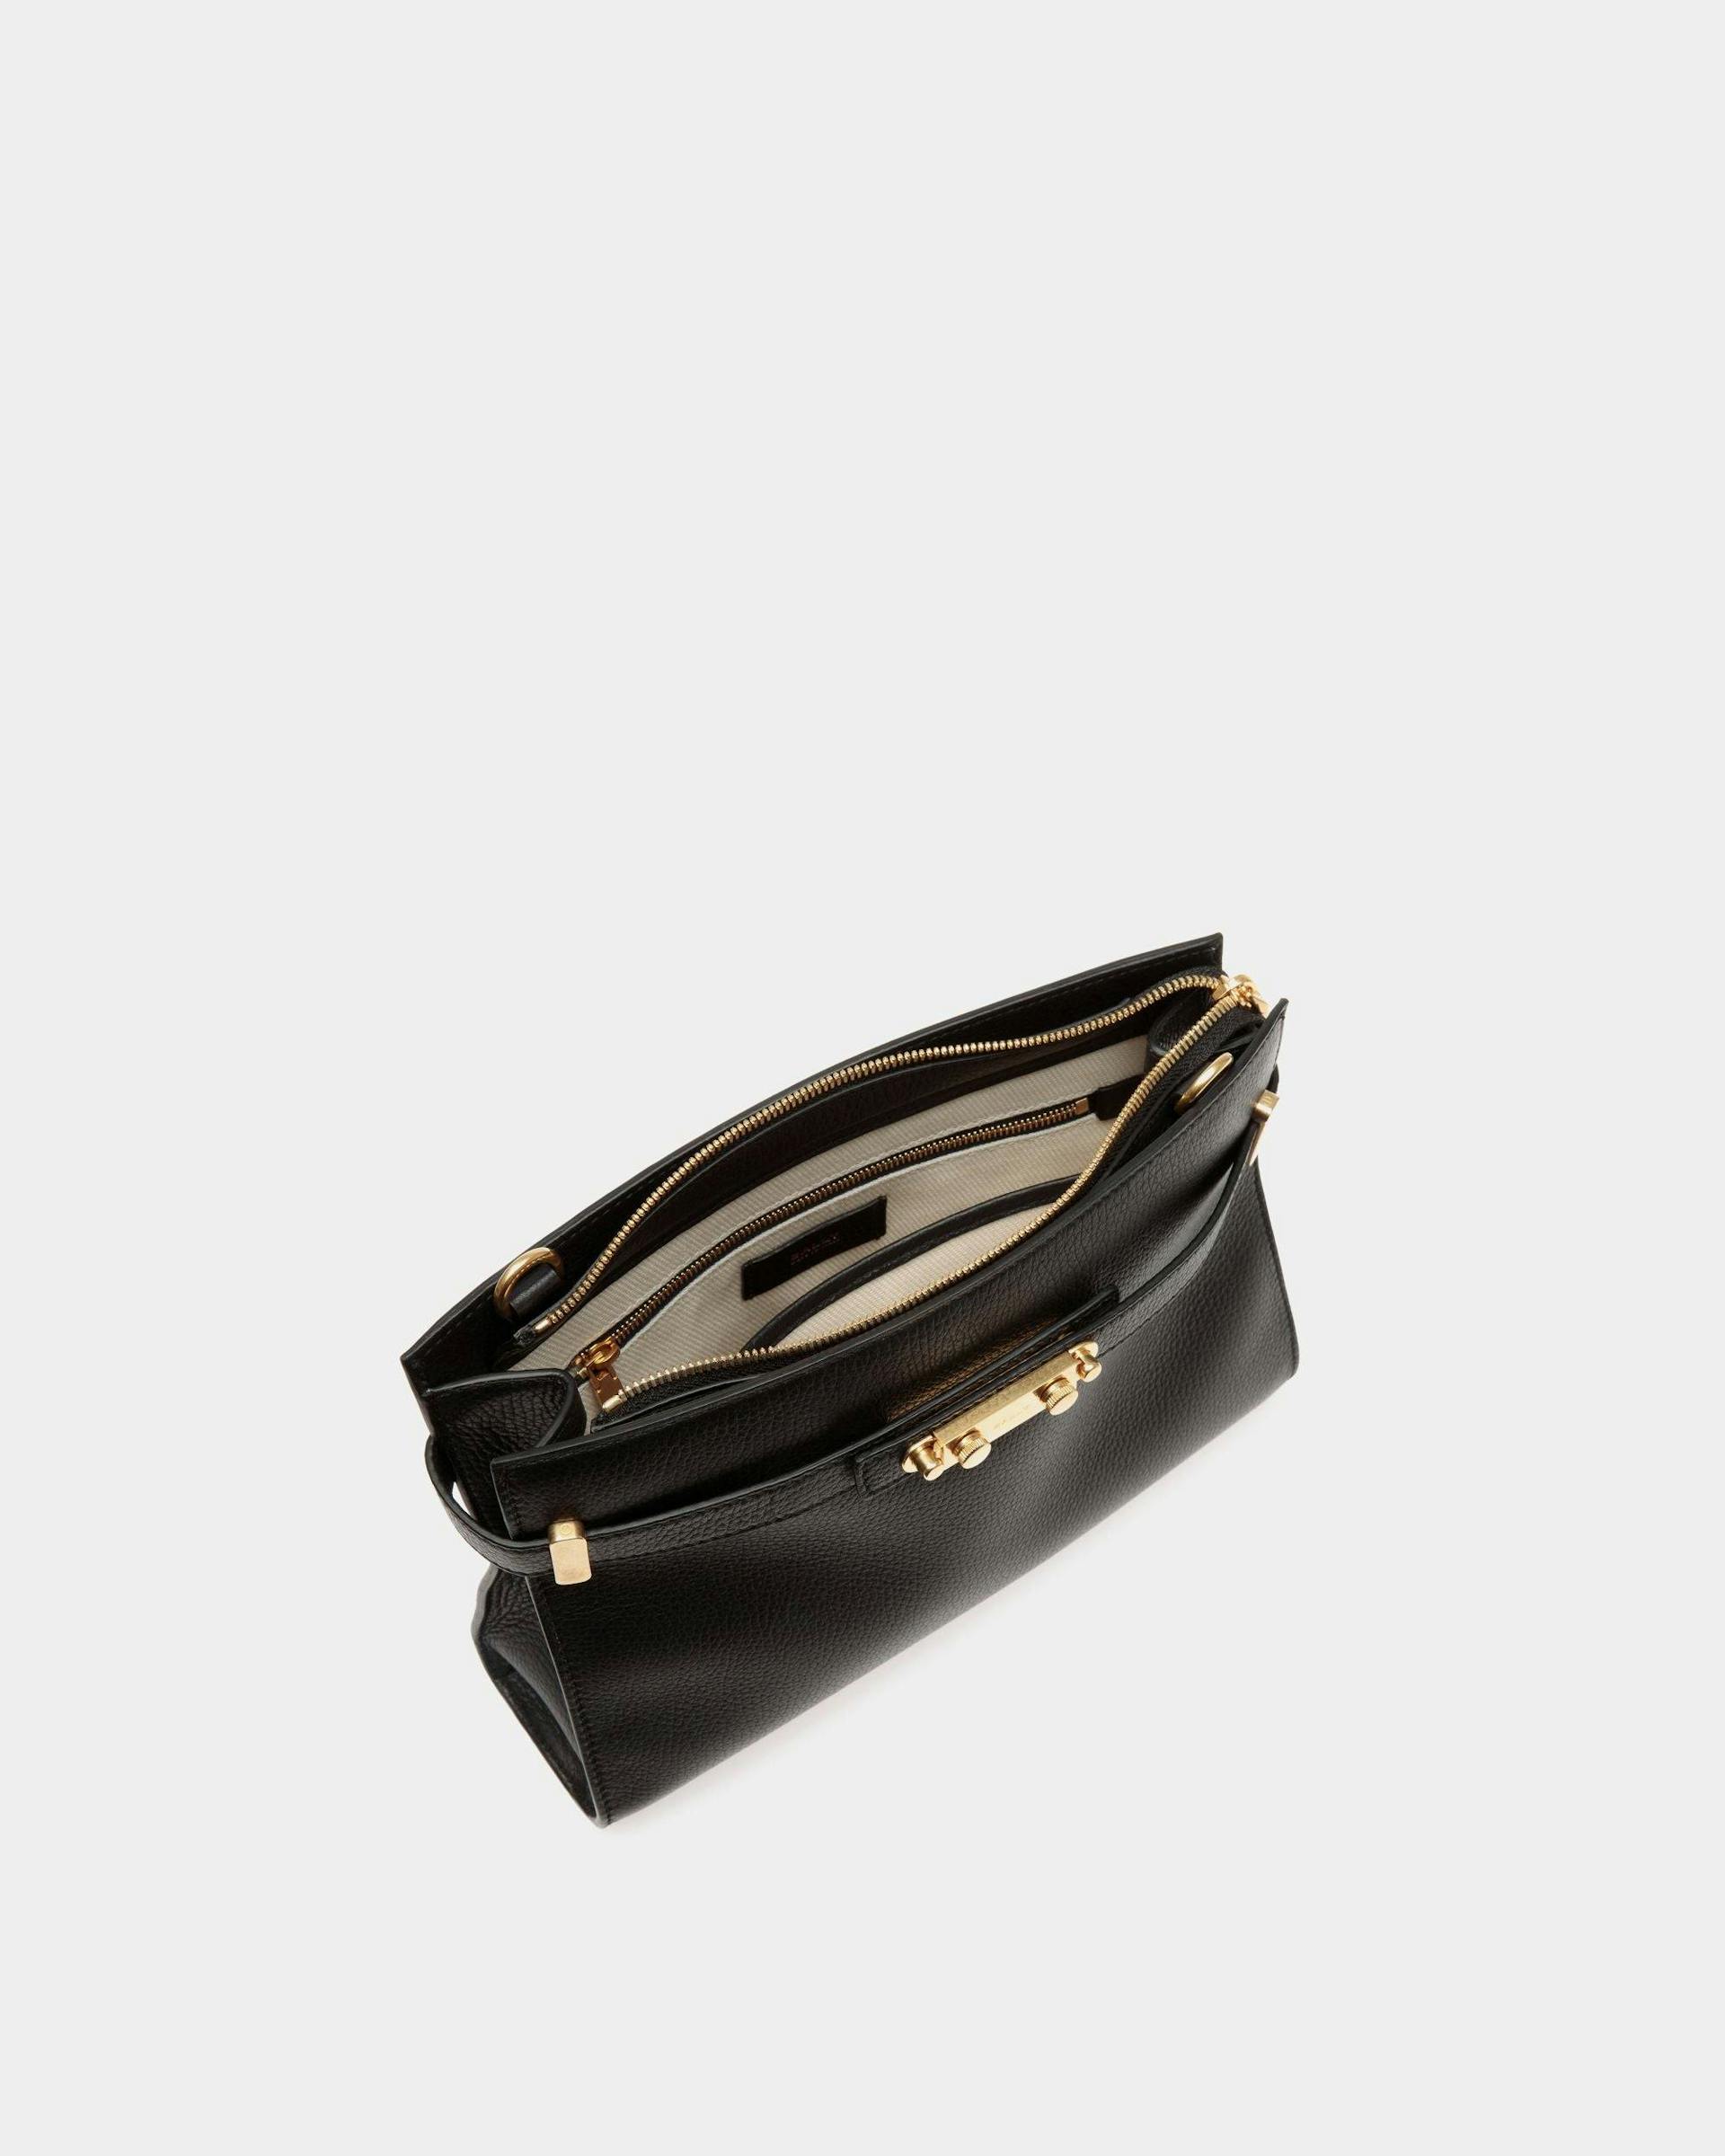 Women's Carriage Shoulder Bag in Black Grained Leather | Bally | Still Life Open / Inside